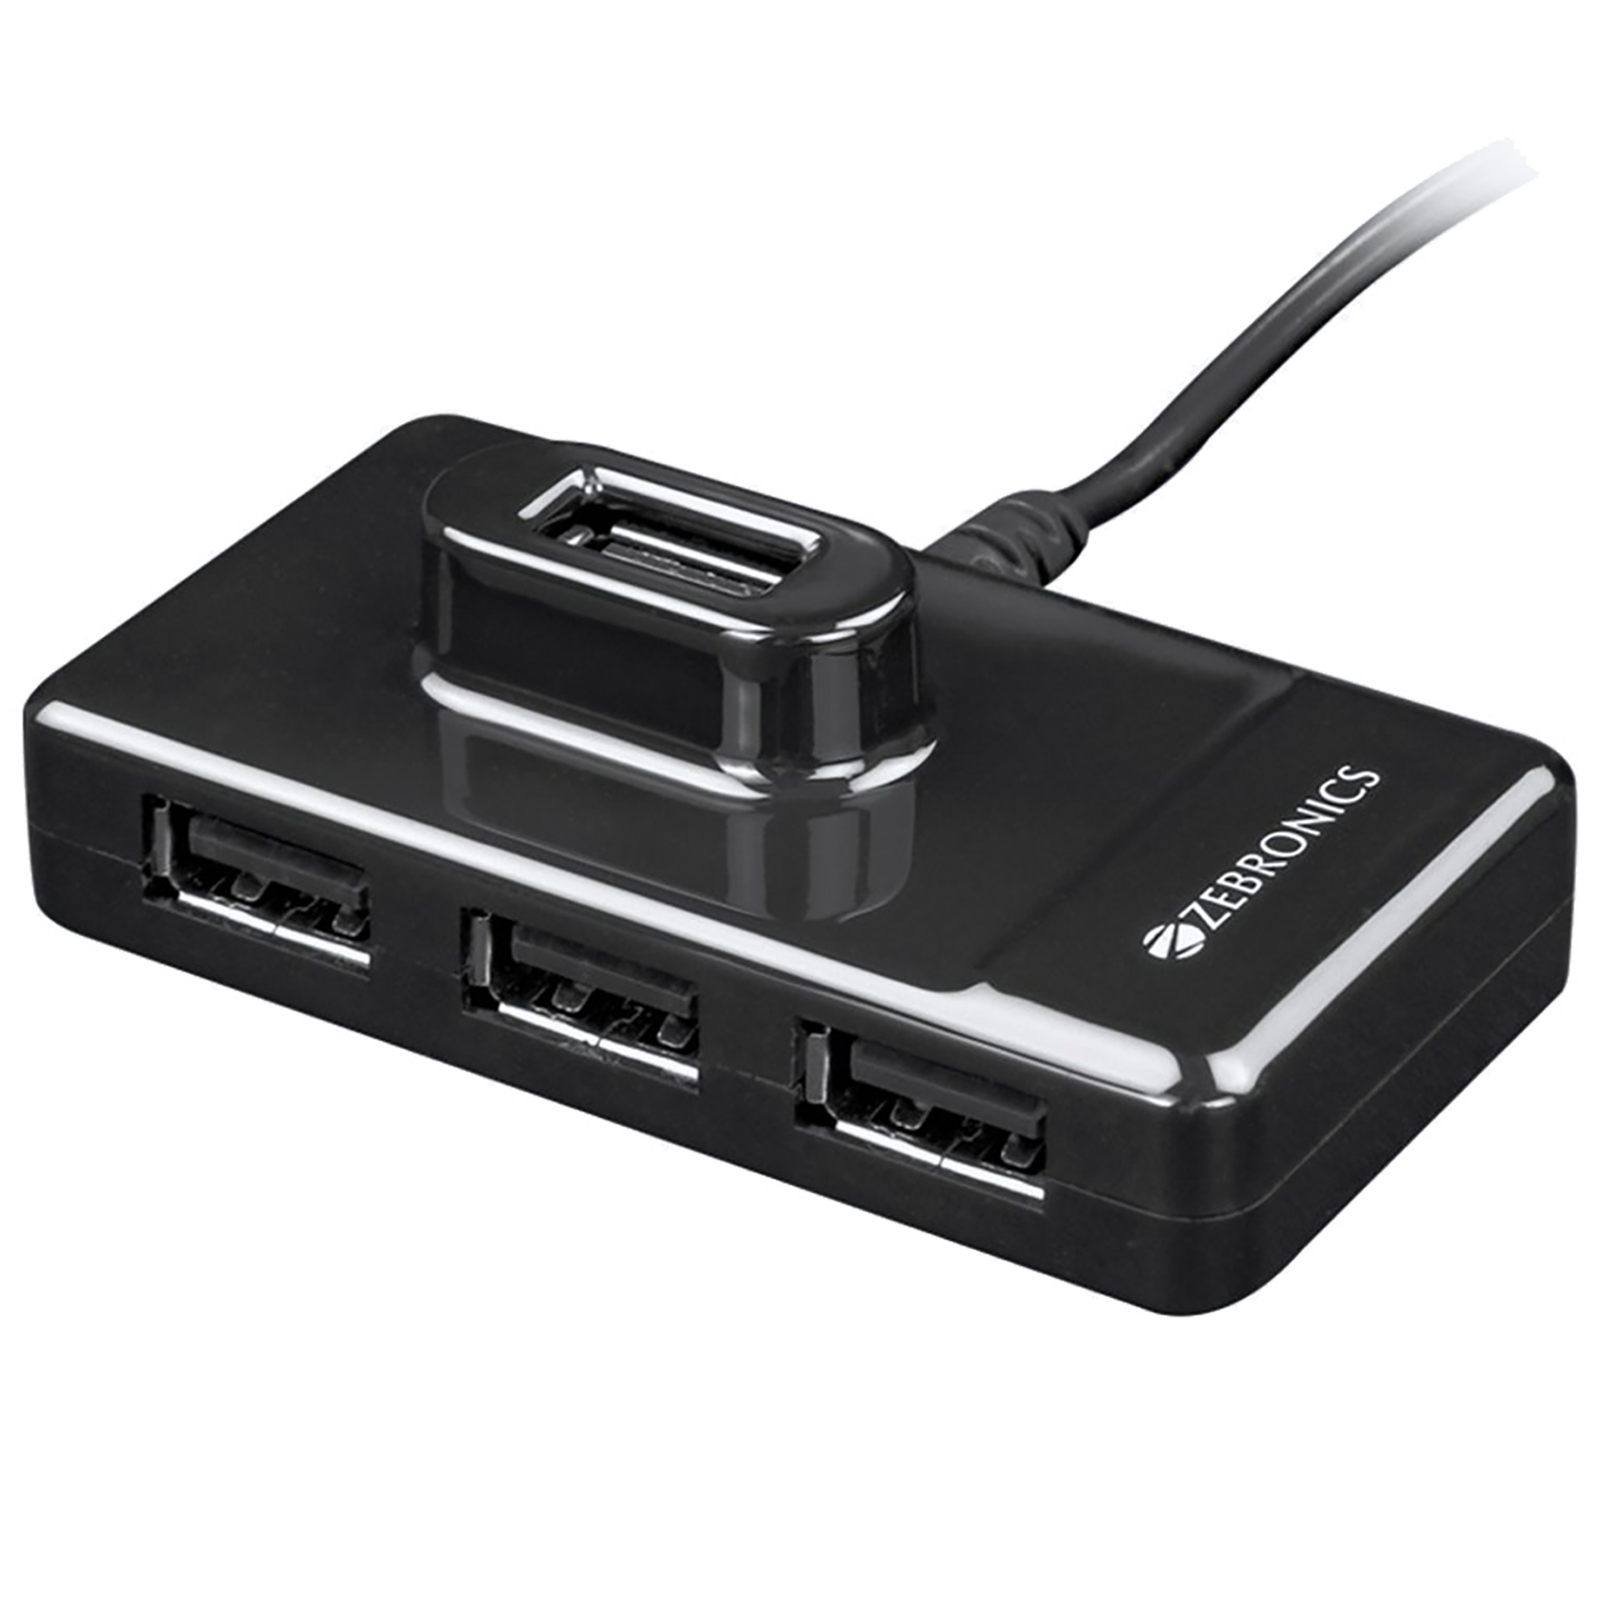 Zebronics 1.62 Meter USB 2.0 (Type-A) to USB 2.0 (Type-A) Spiltter USB Cable (Port For Optional Power Adapter, ZEB-100HB, Black)_1